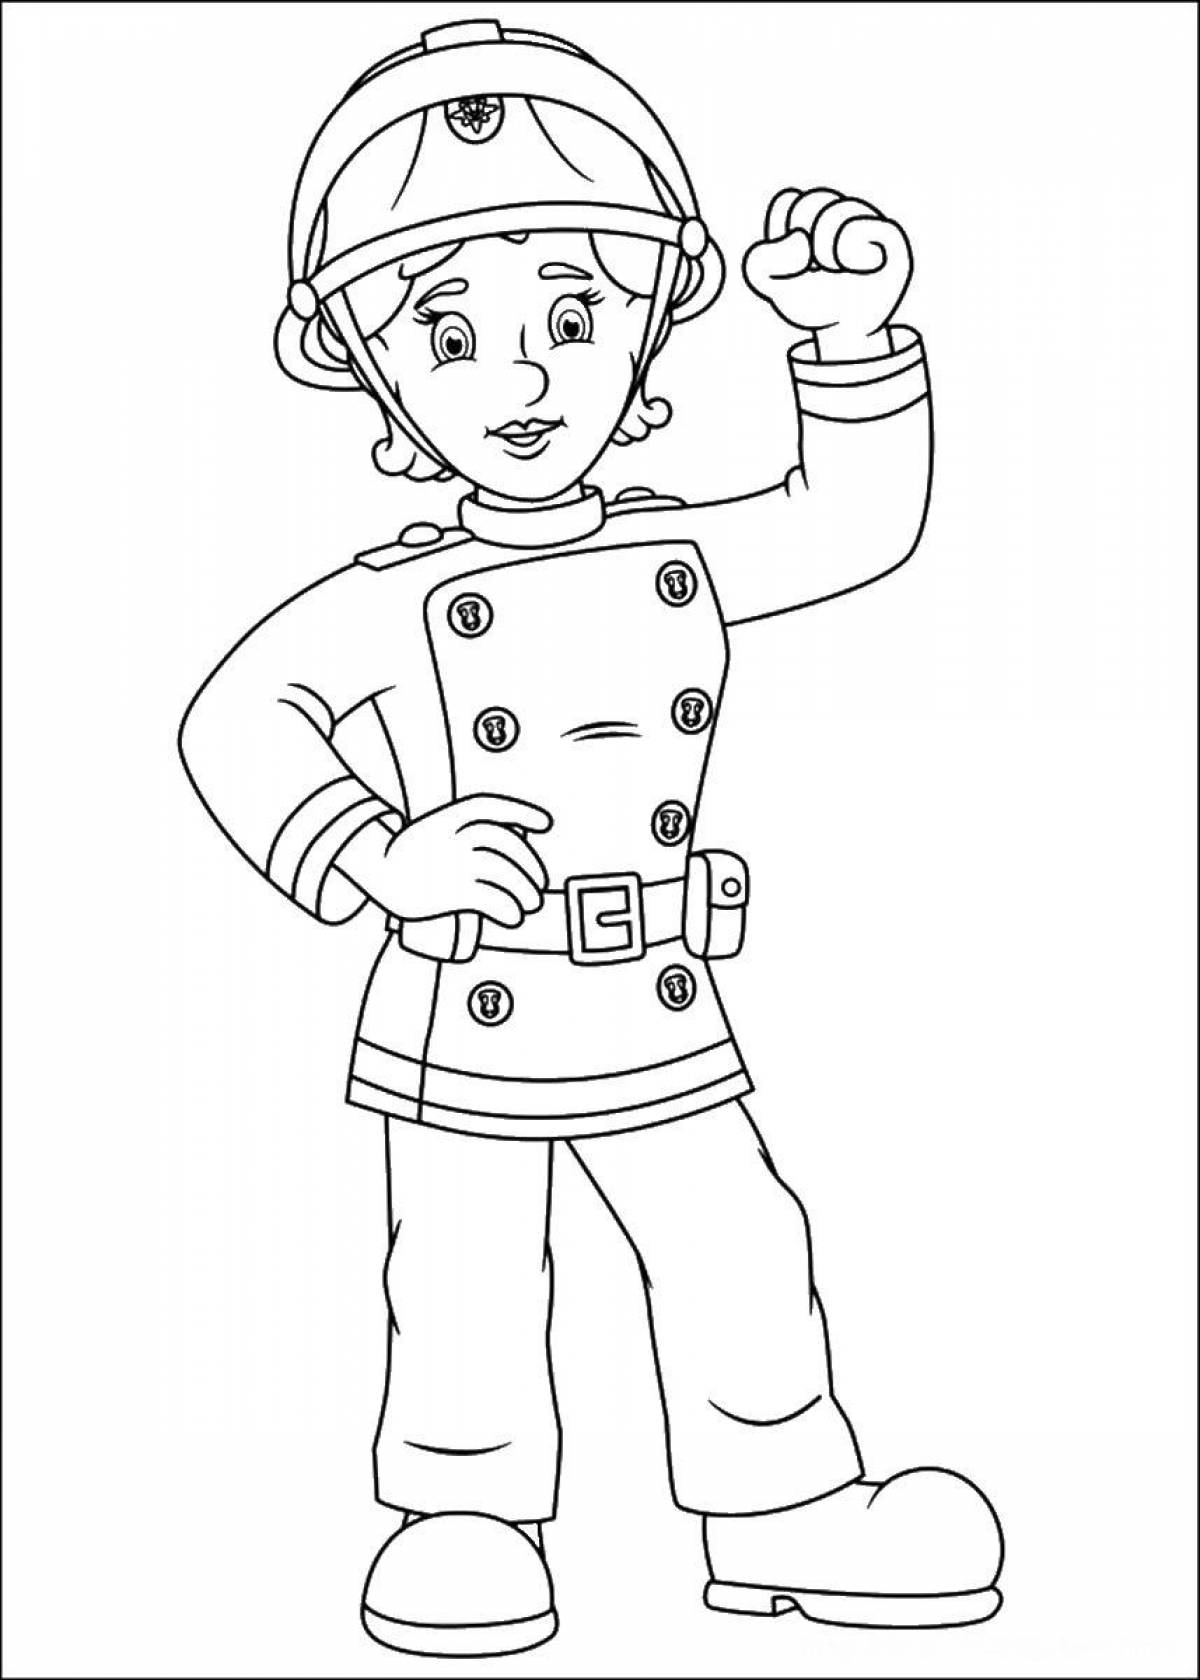 Adorable fireman coloring page for kids